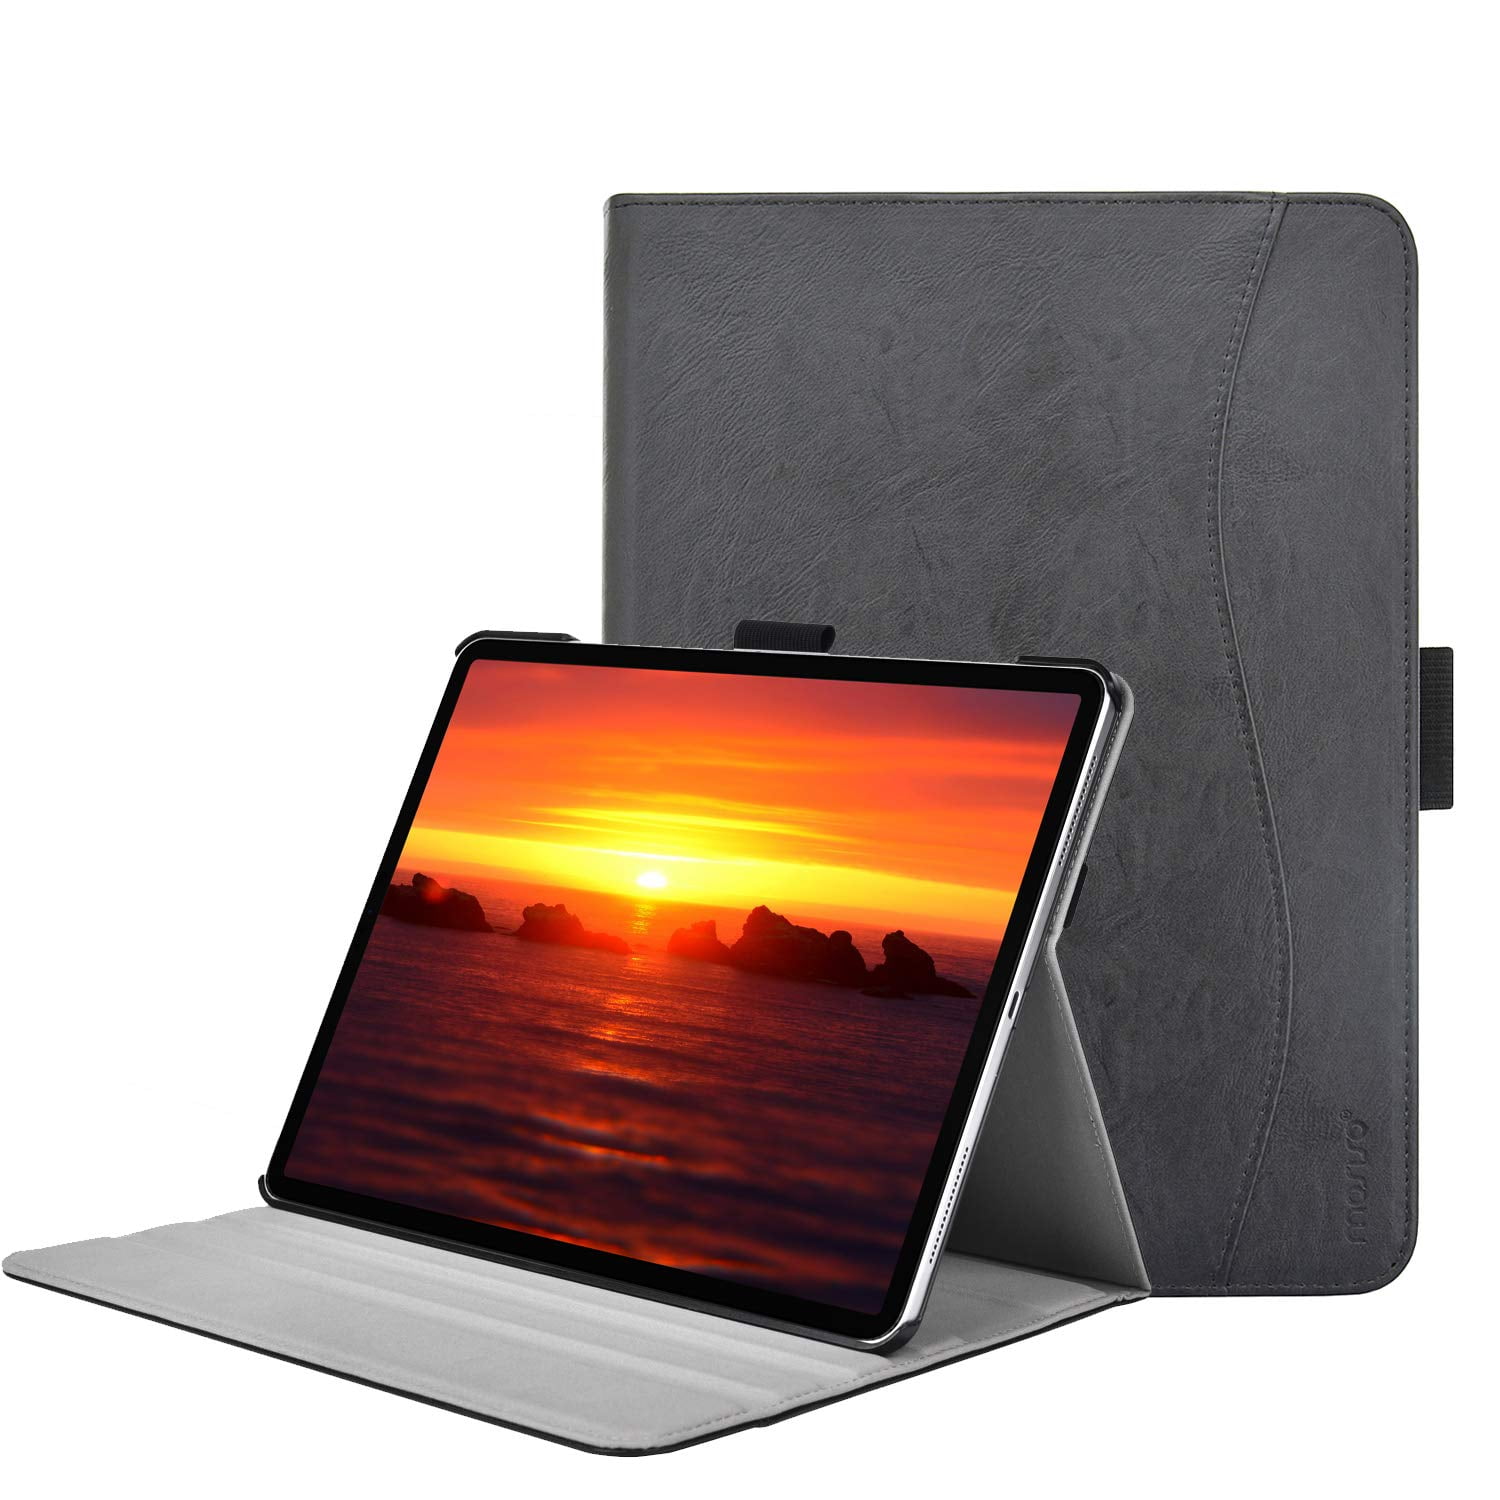 iPad 6/5 Laptop Sleeve Multifonctionnel Sac Main Polyester iPad Air 3 10.5 2019 iPad 1/2/3/4 iPad Air 2/Air Gris Surface Go 2018 MOSISO Housse Compatible avec 9.7-11 Pouces iPad Pro 